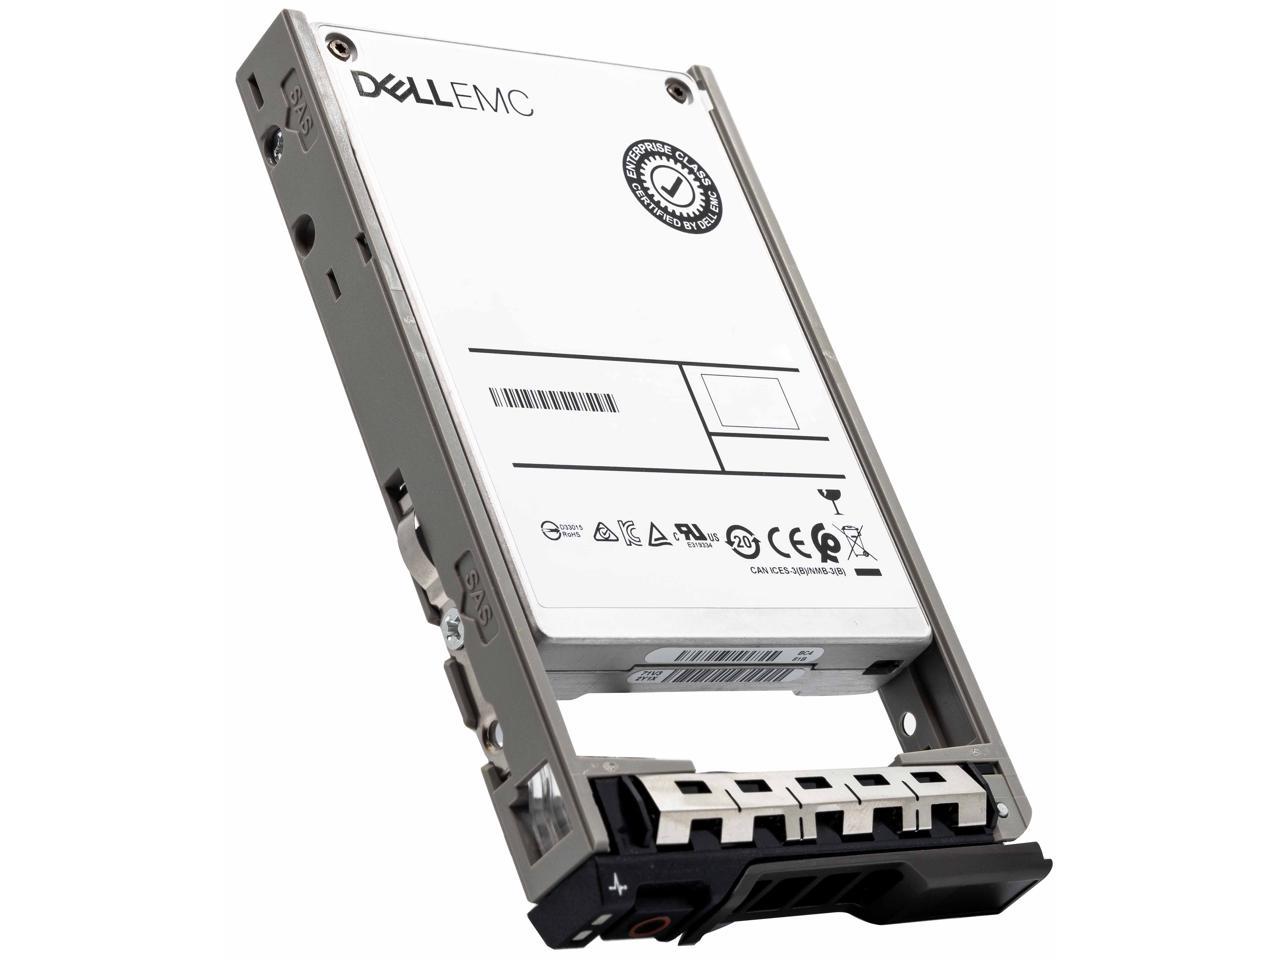 Dell G13 0KNT26 1.92TB SATA 6Gb/s 2.5" Manufacturer Recertified SSD